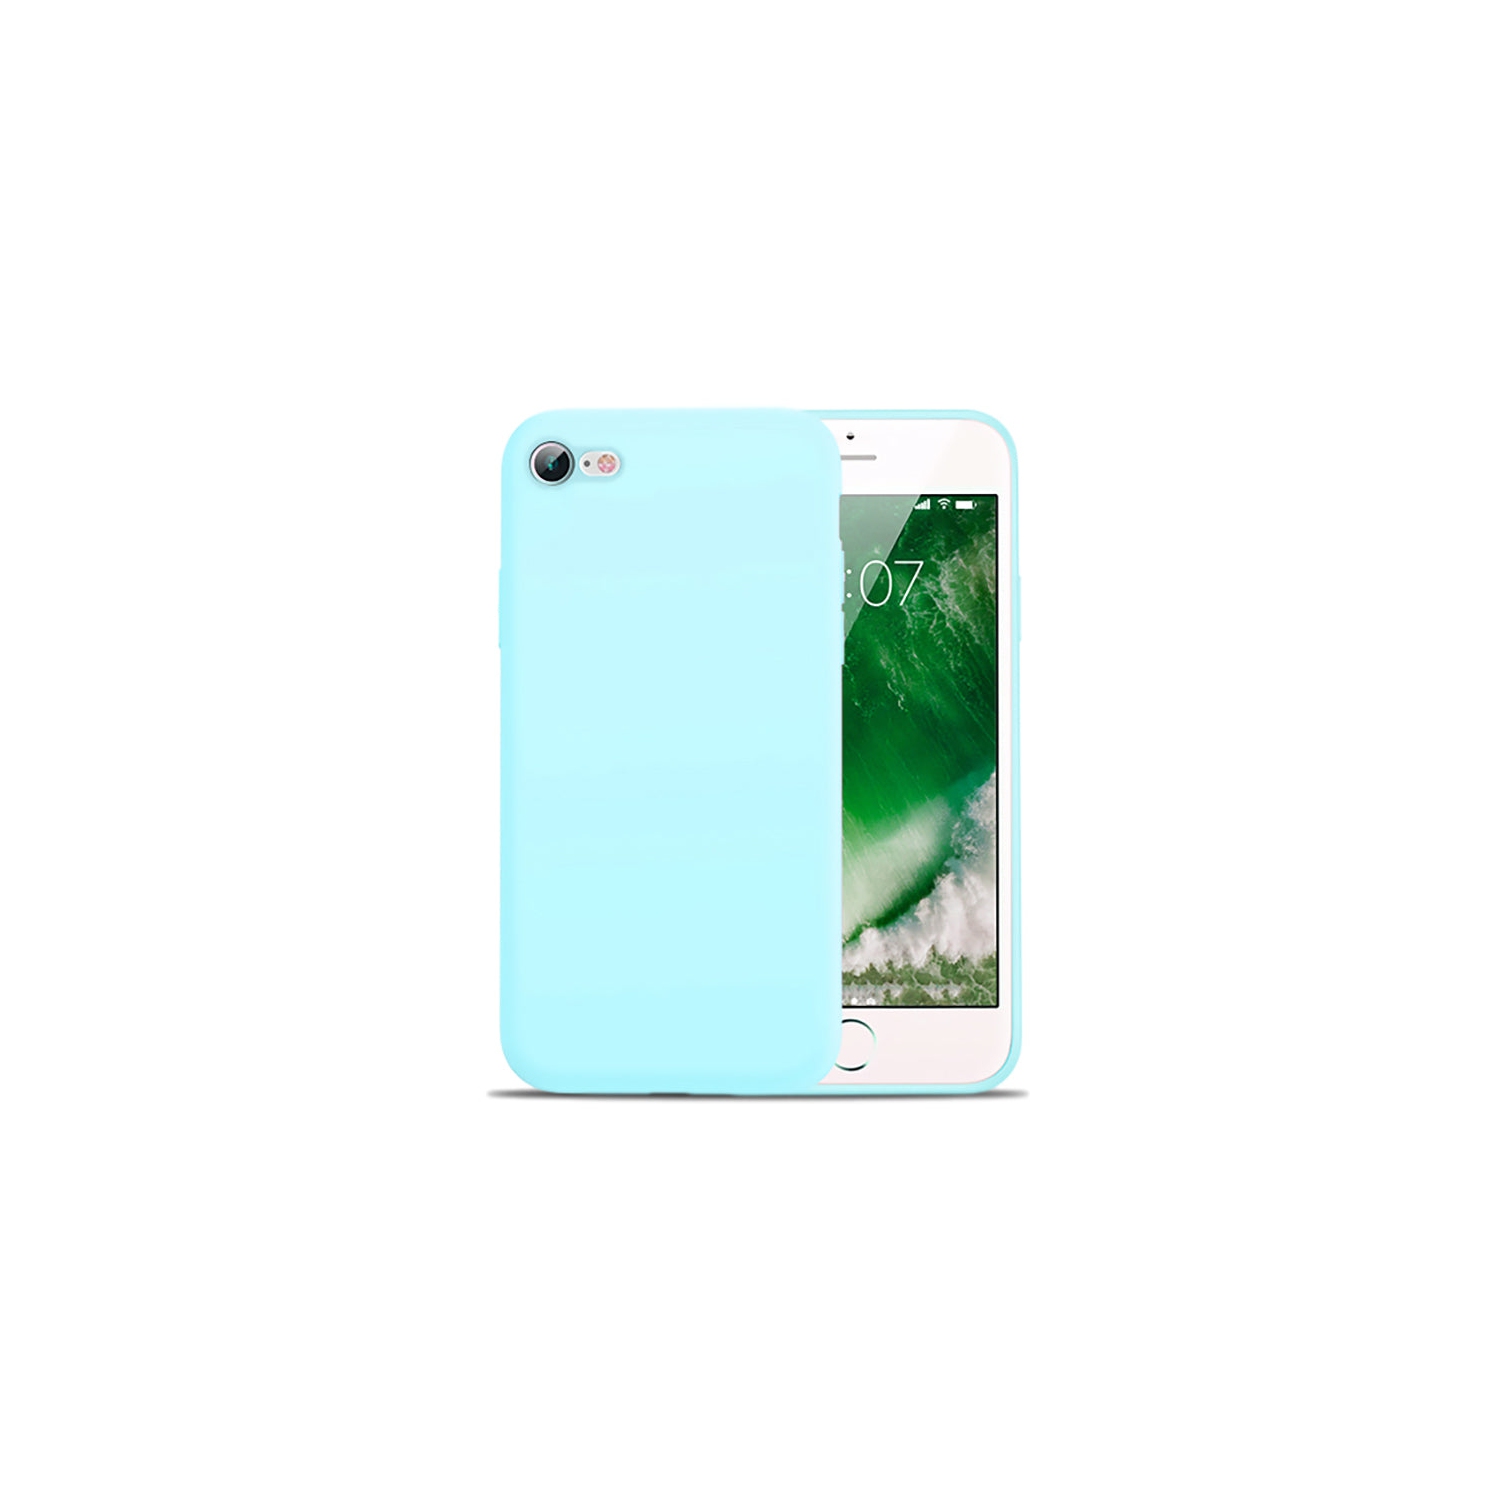 PANDACO Soft Shell Matte Mint Blue Case for iPhone 6 Plus or iPhone 6S Plus